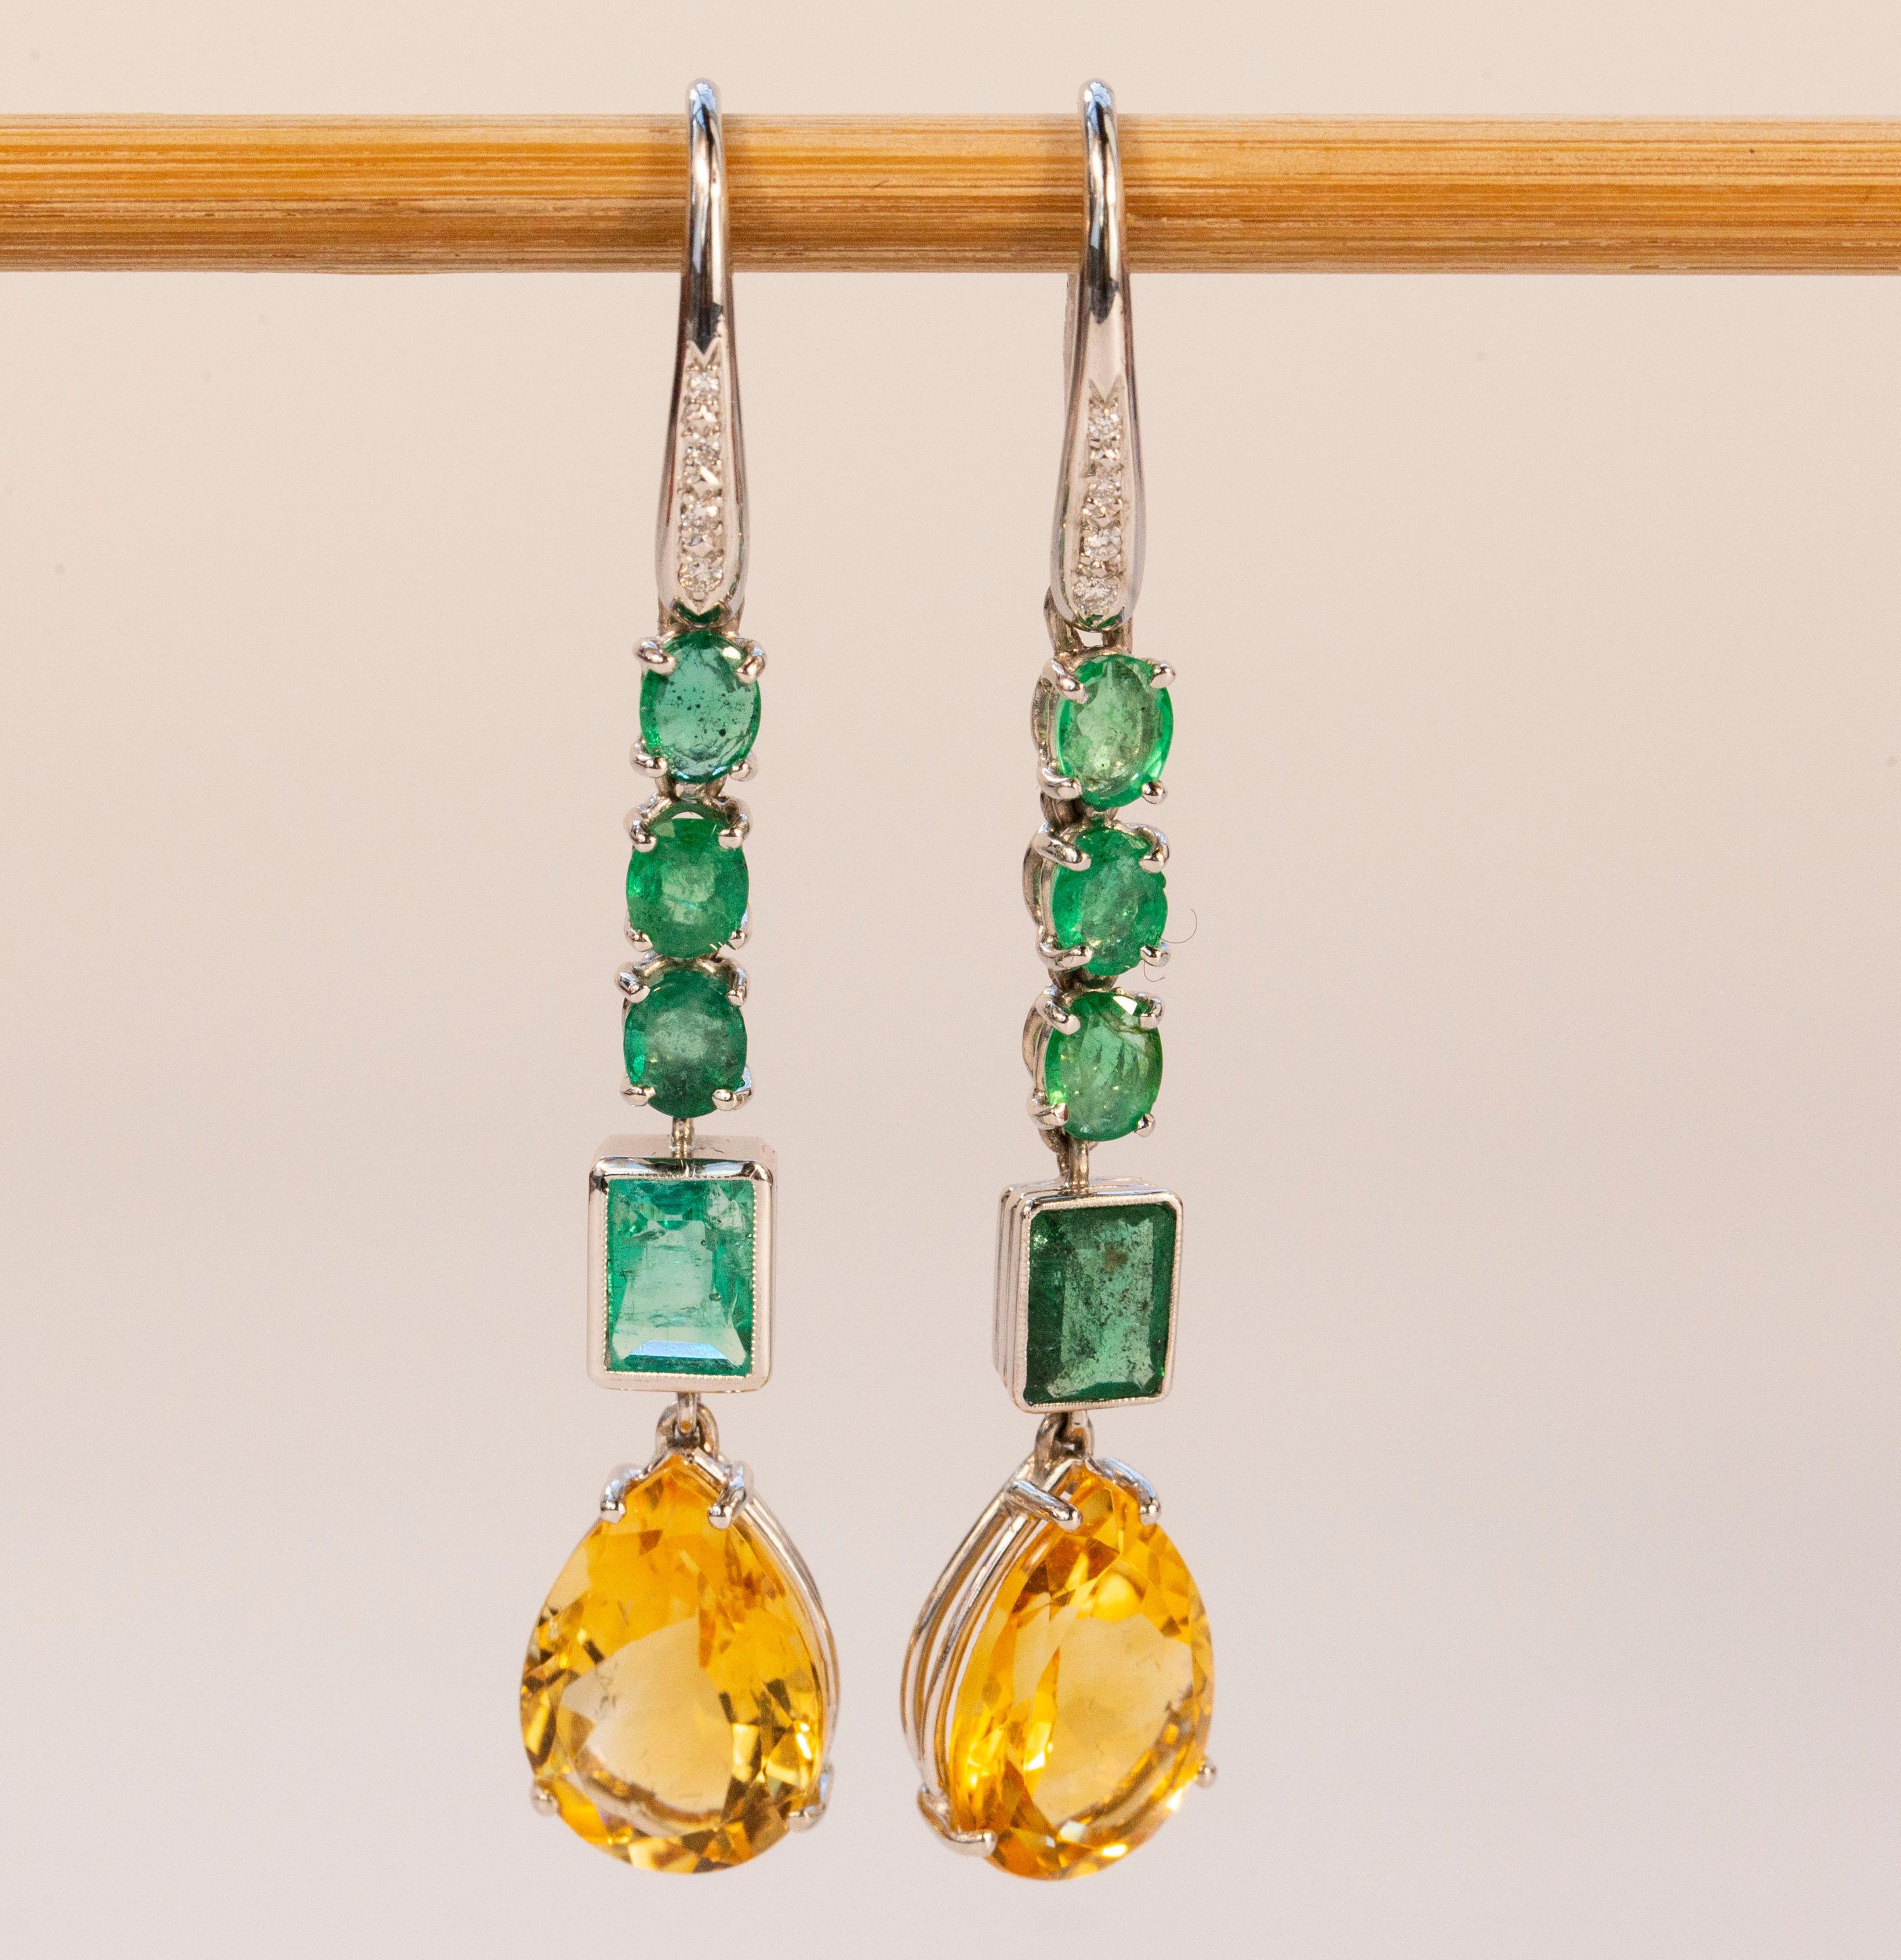 A set consisting of two dangle earrings made of 18 karat white gold and set with four emerald gemstones, citrine and diamonds. In each earring, three of the four emerald gemstones feature oval cut (ca. 0.4 carats per one gemstone) and the fourth